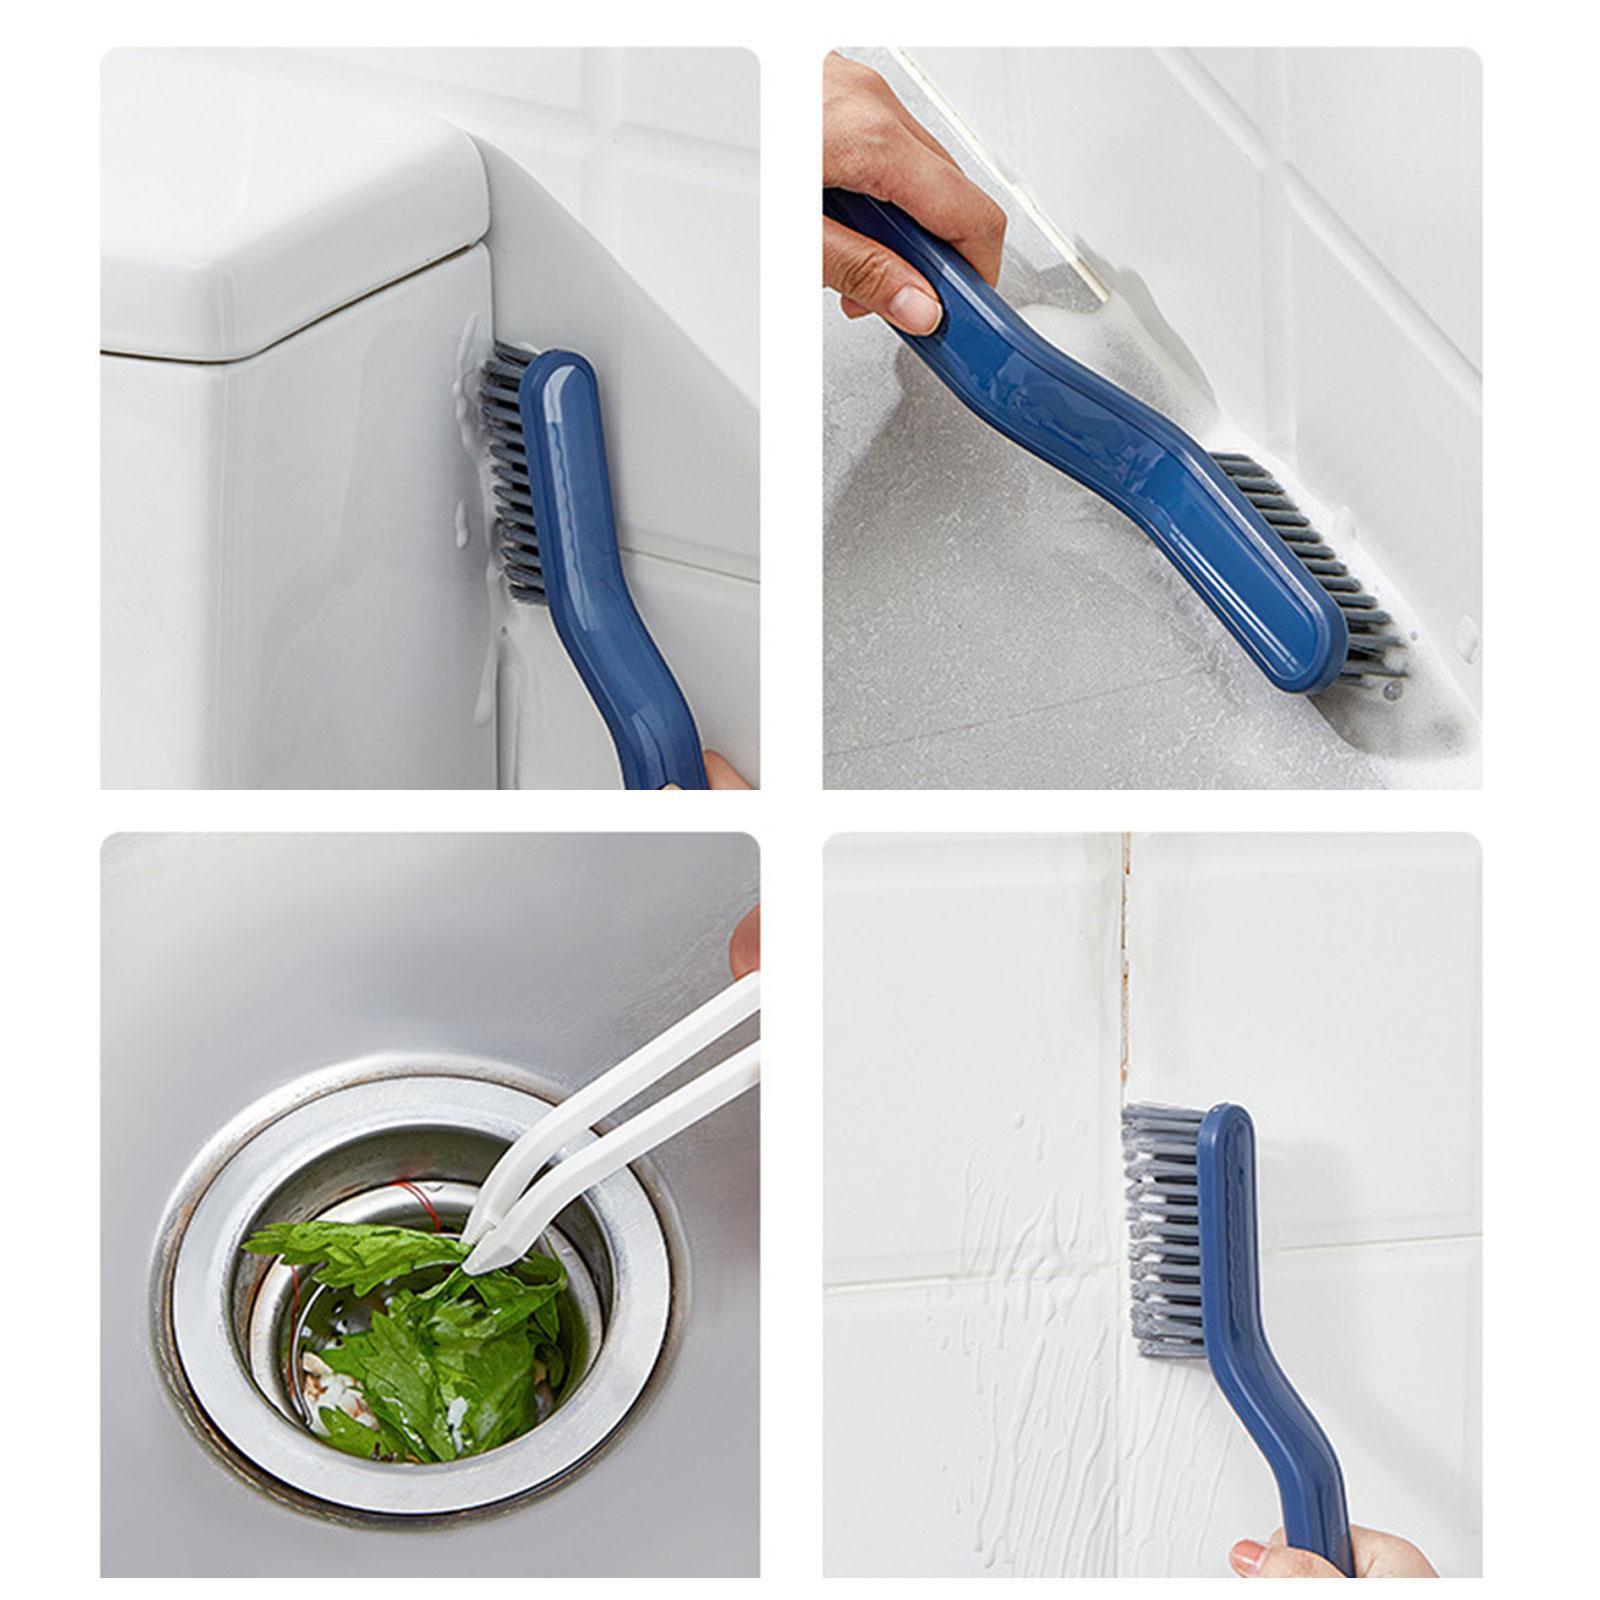 (New Year Hot Sale 48% OFF) Multifunctional Crevice Cleaner Brush